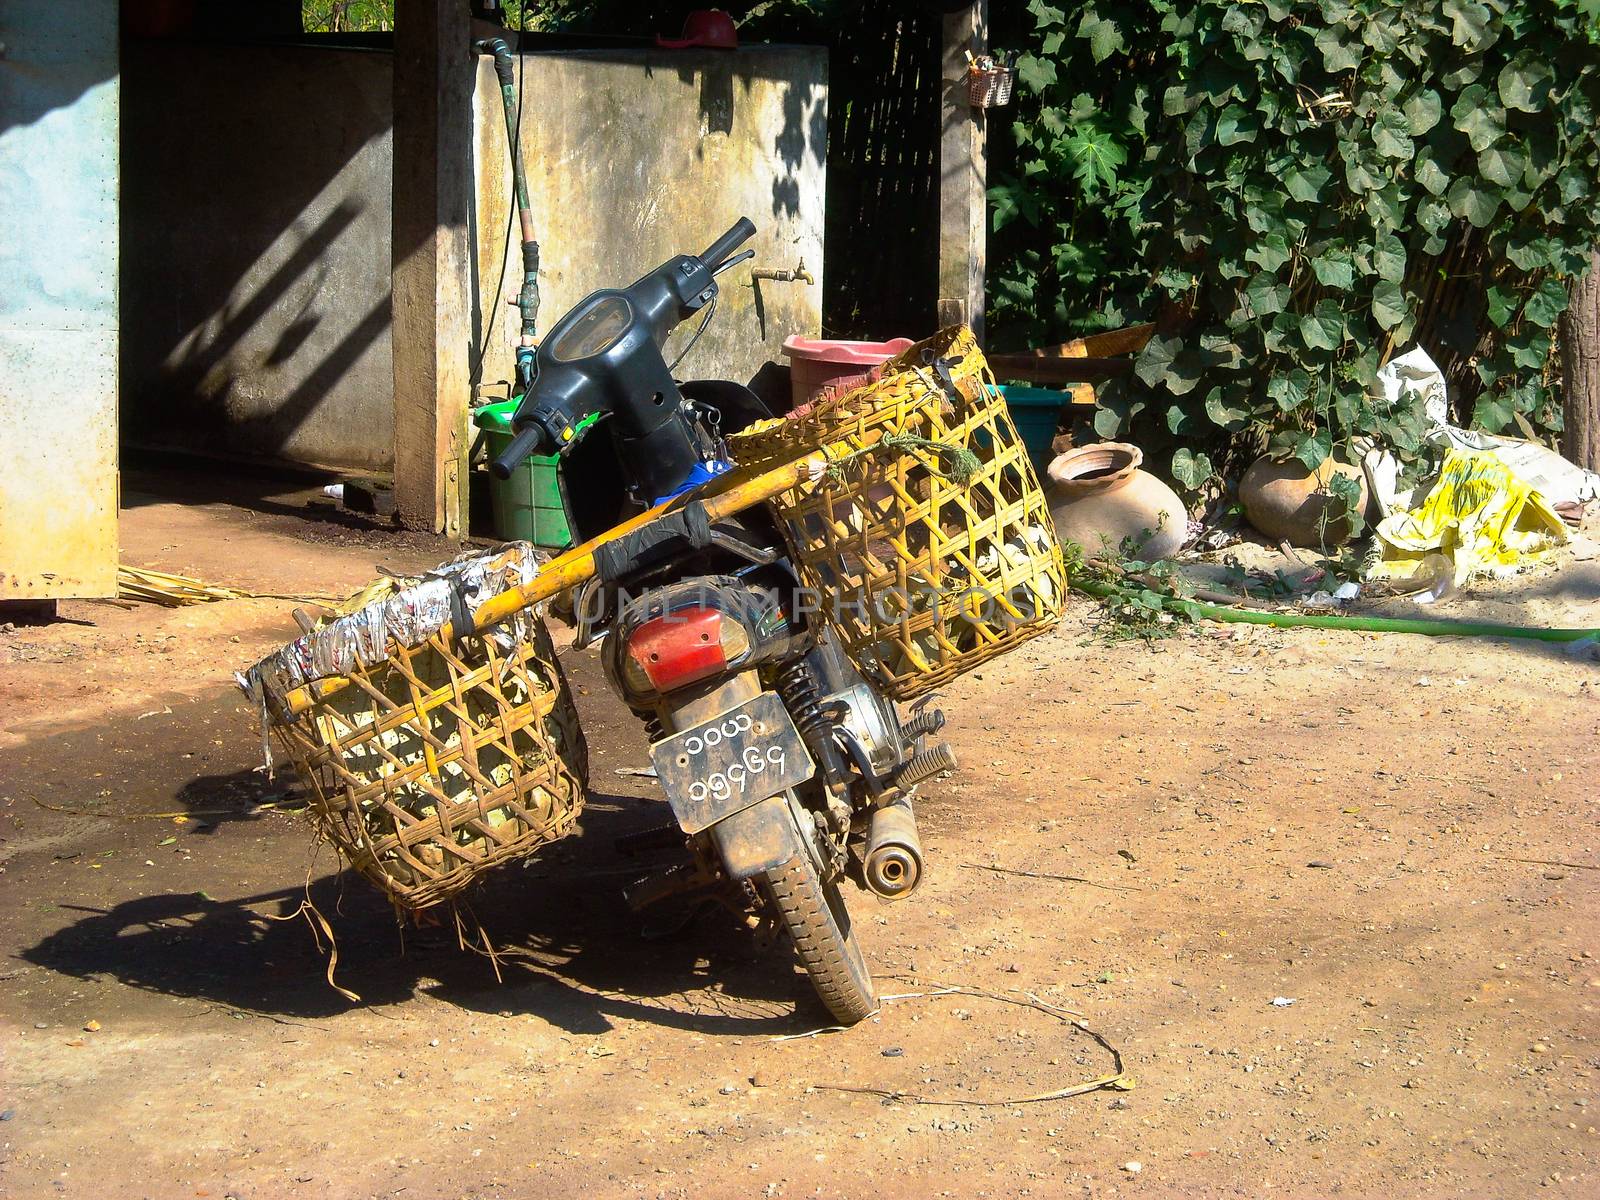 a moped with souvenirs in burma at the tour